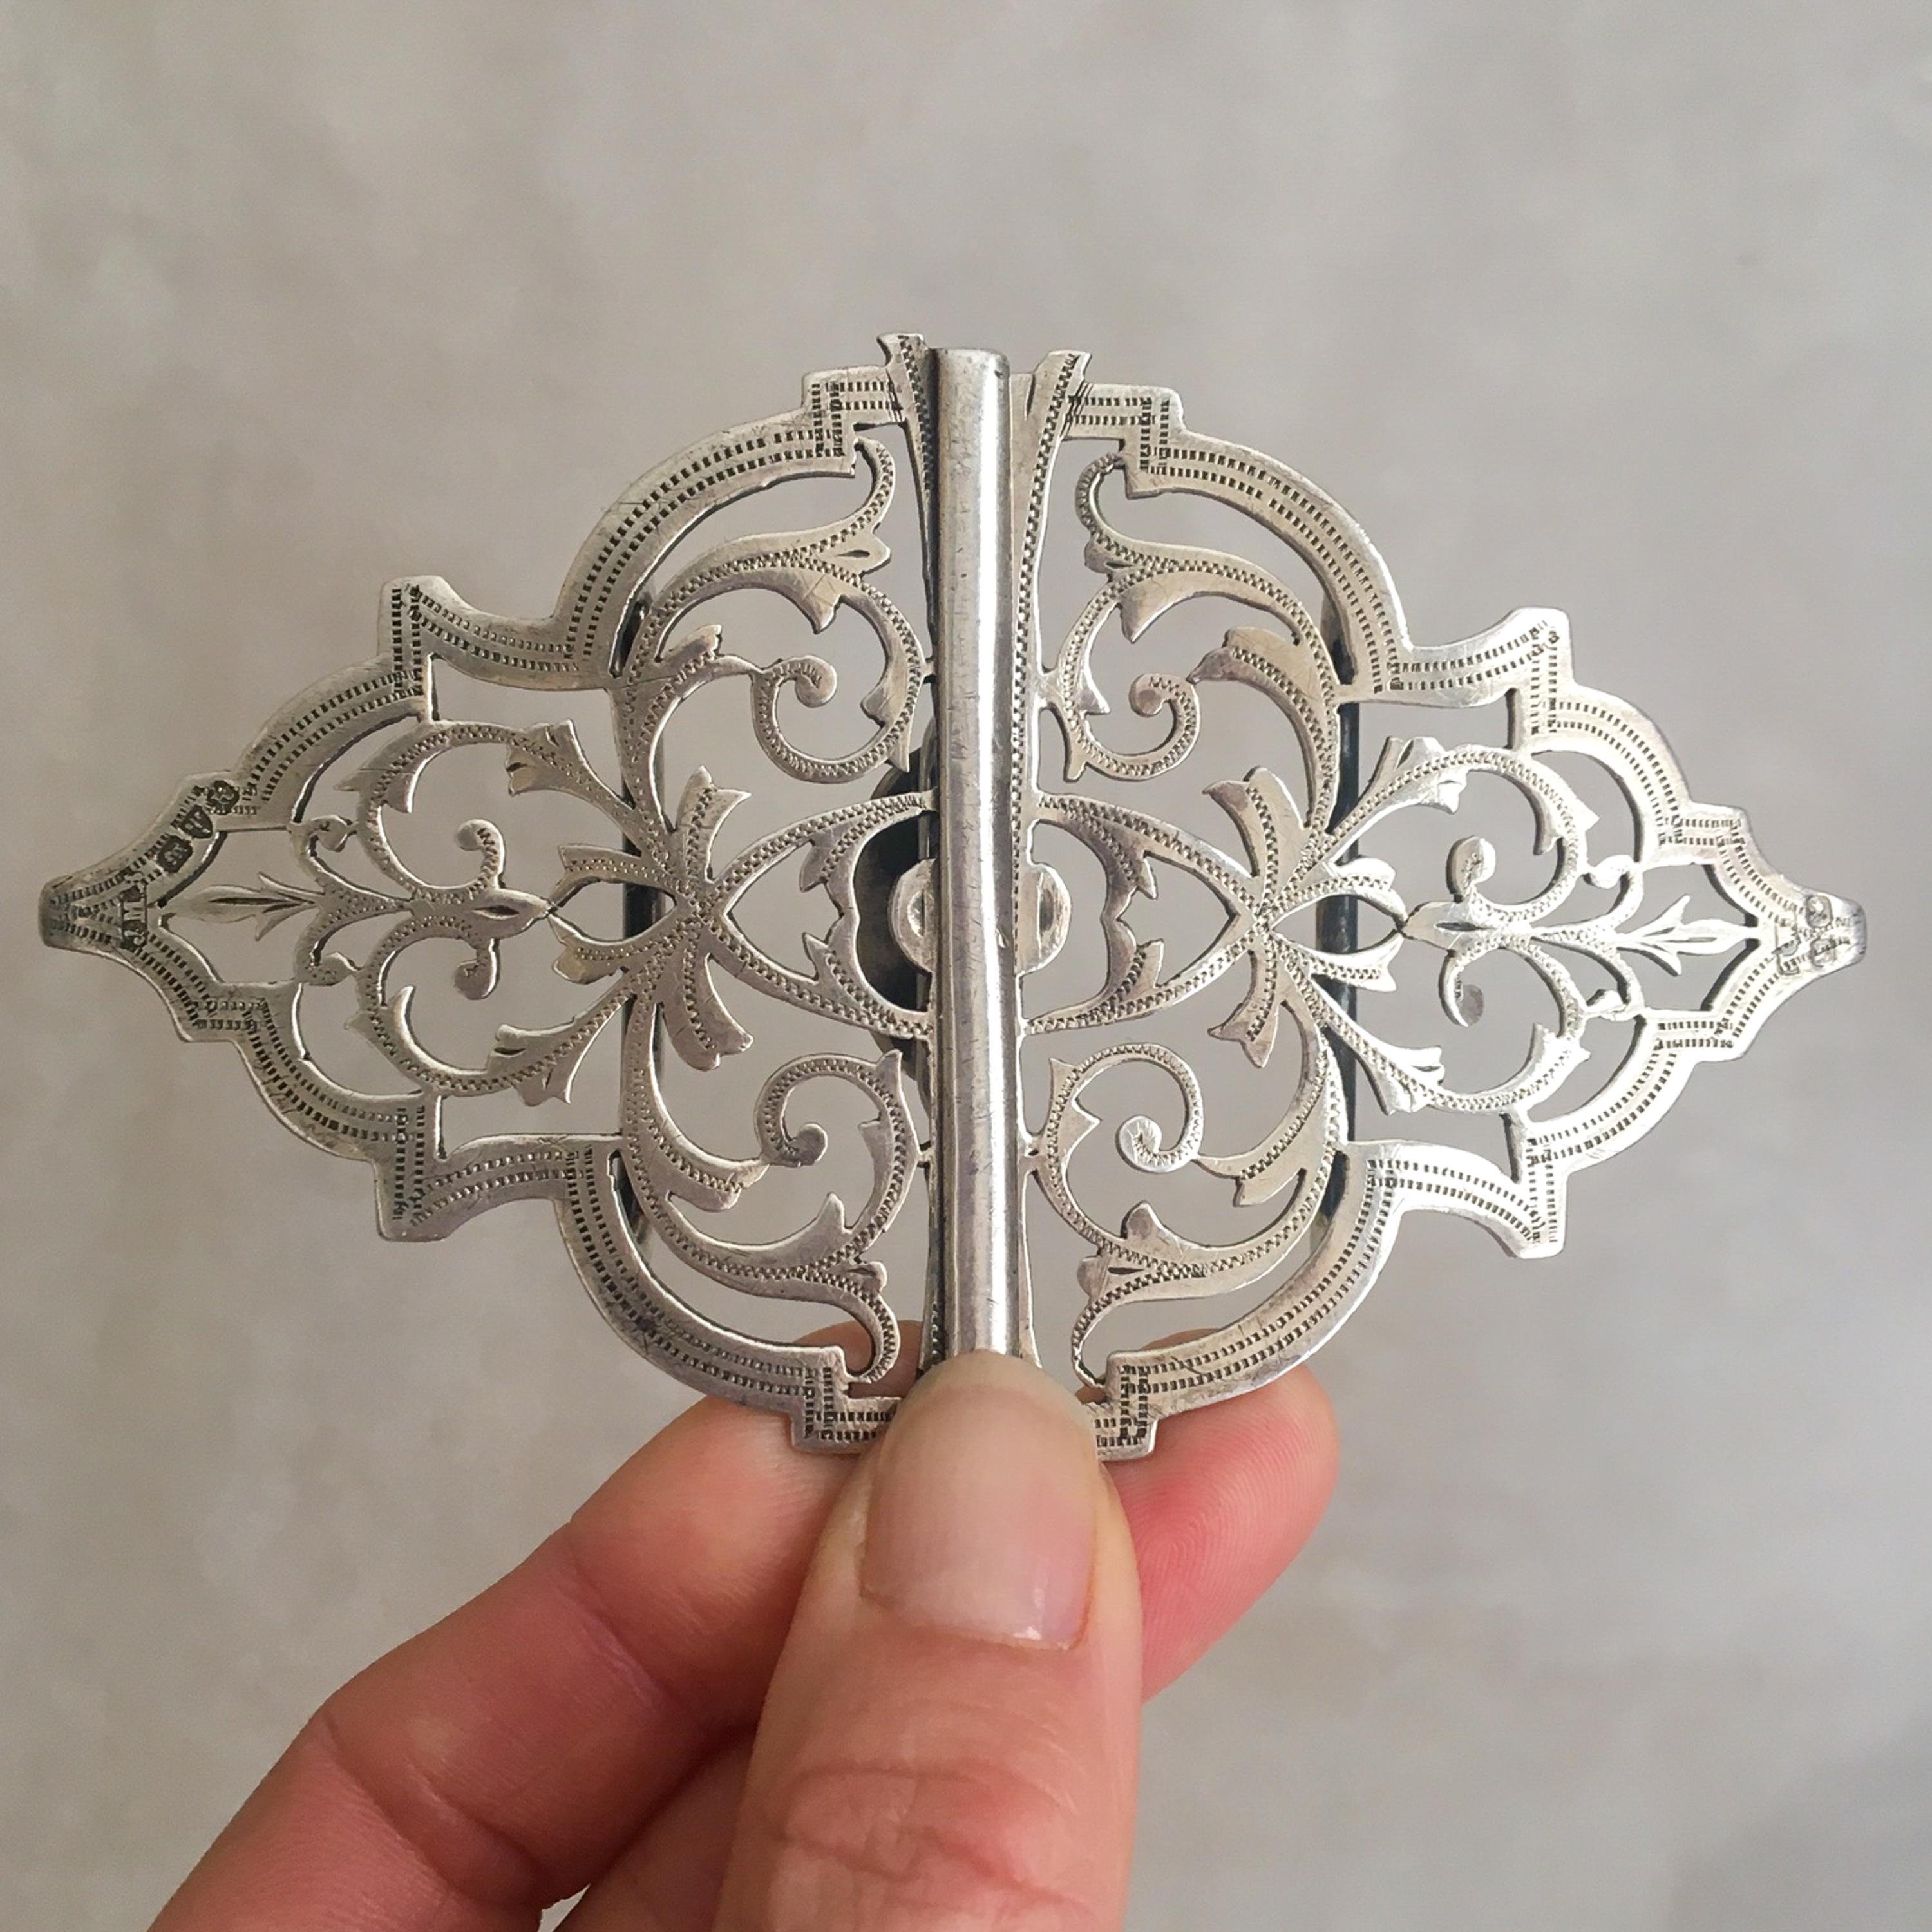 This is an antique Edwardian nurses belt buckle crafted in sterling silver. An excellent slightly curved shape buckle, decorated with pierced work pattern and engraved foliage. Popular motifs in this Edwardian artisan era includes, flowers,